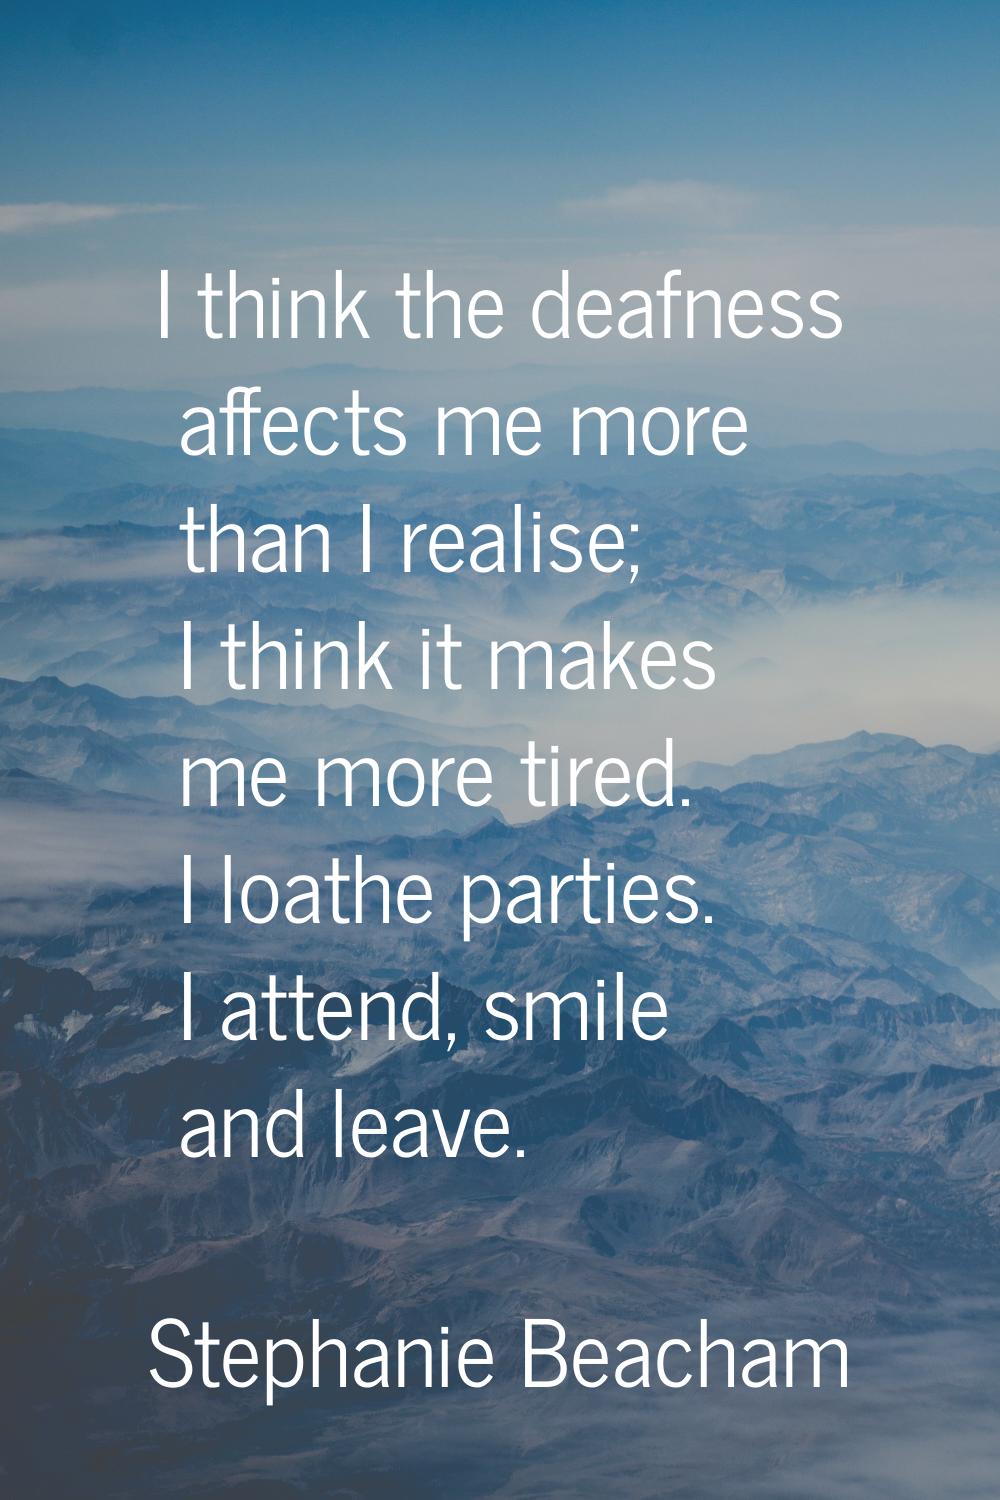 I think the deafness affects me more than I realise; I think it makes me more tired. I loathe parti